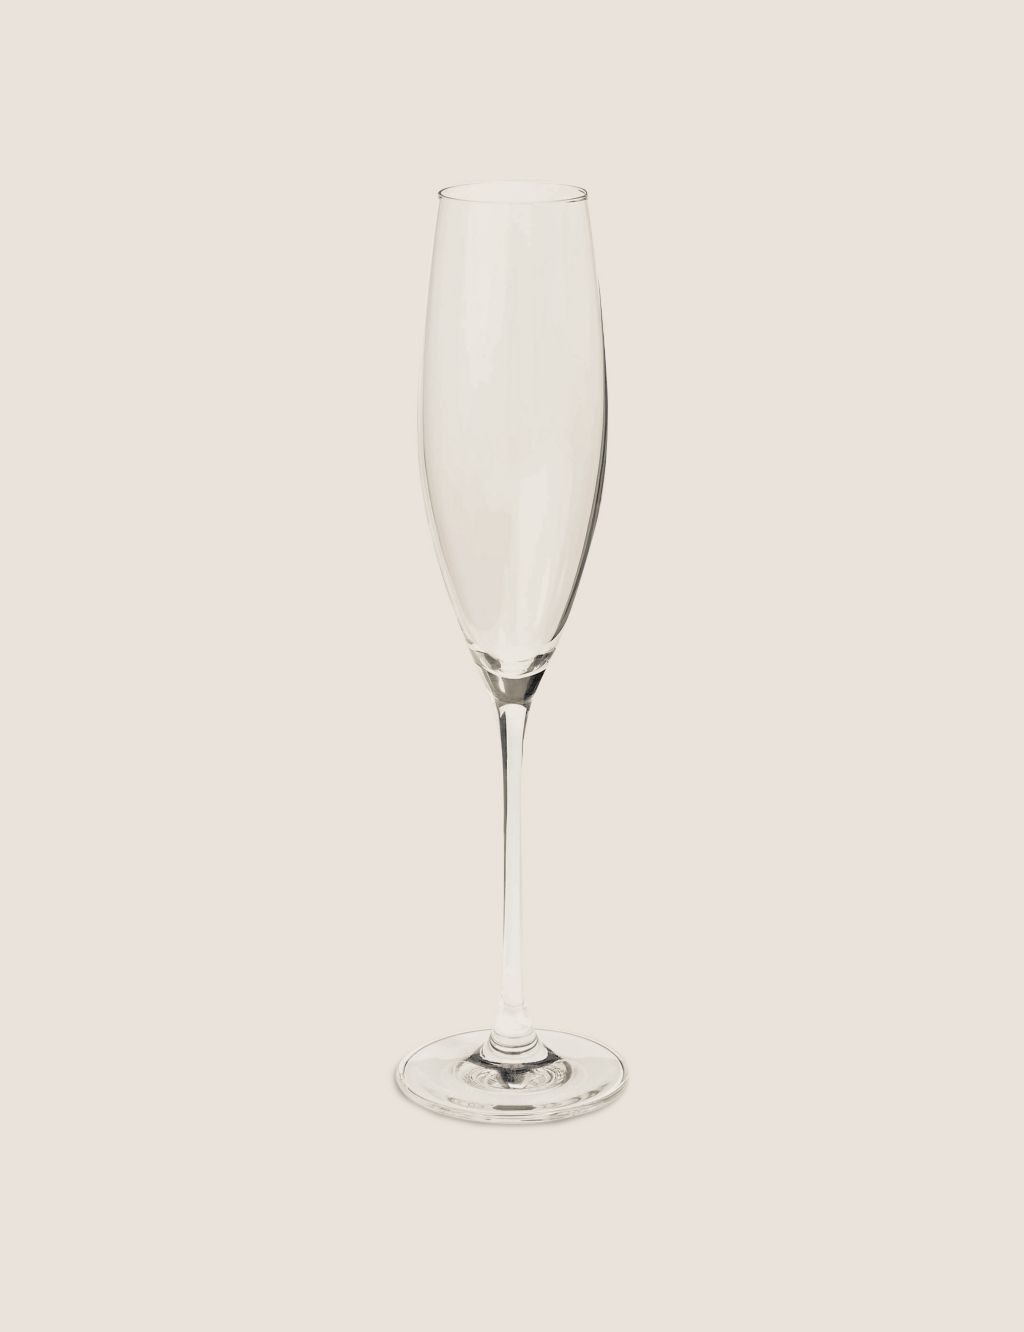 Set of 4 Champagne Flutes 1 of 3